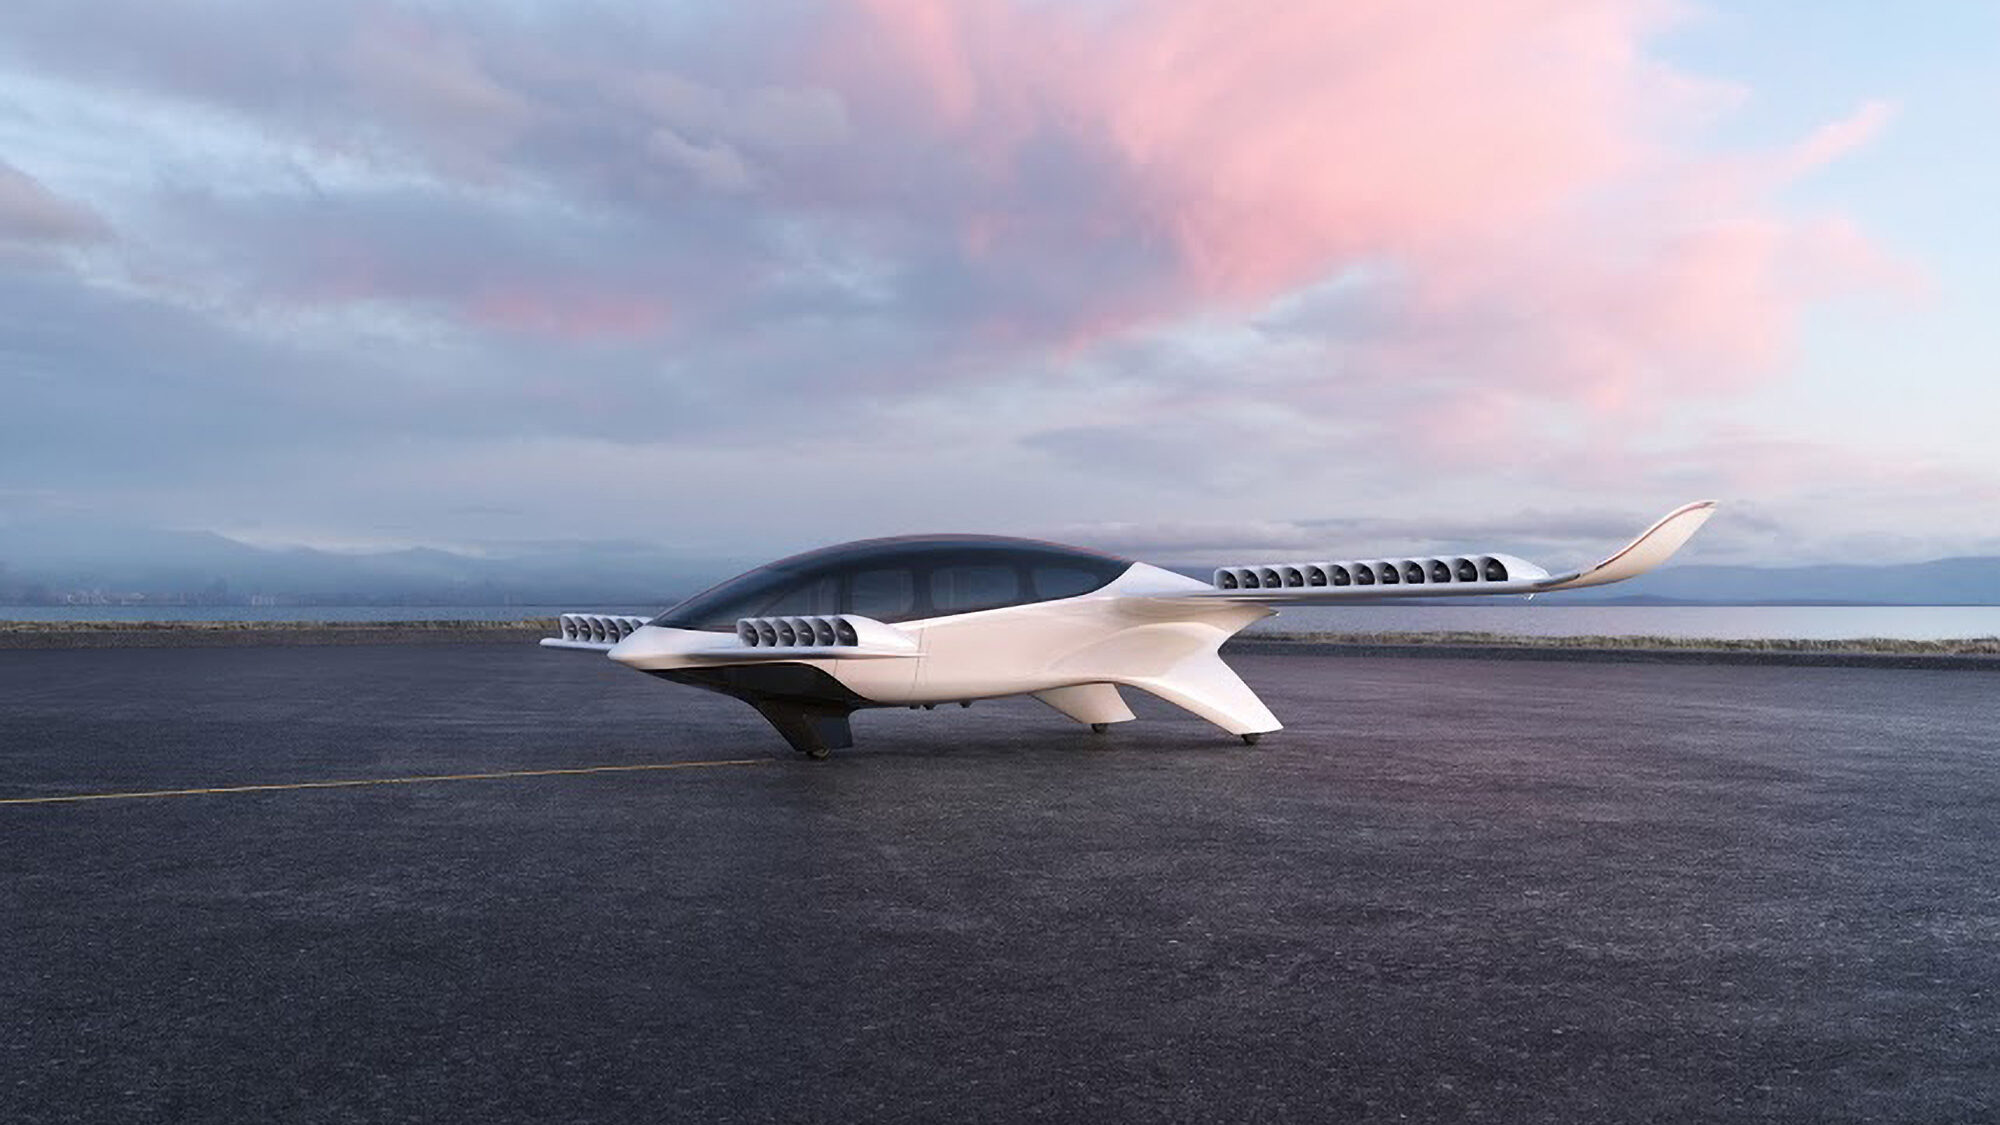 The Lilium jet has been in development since 2015. (Lilium/Real Press)